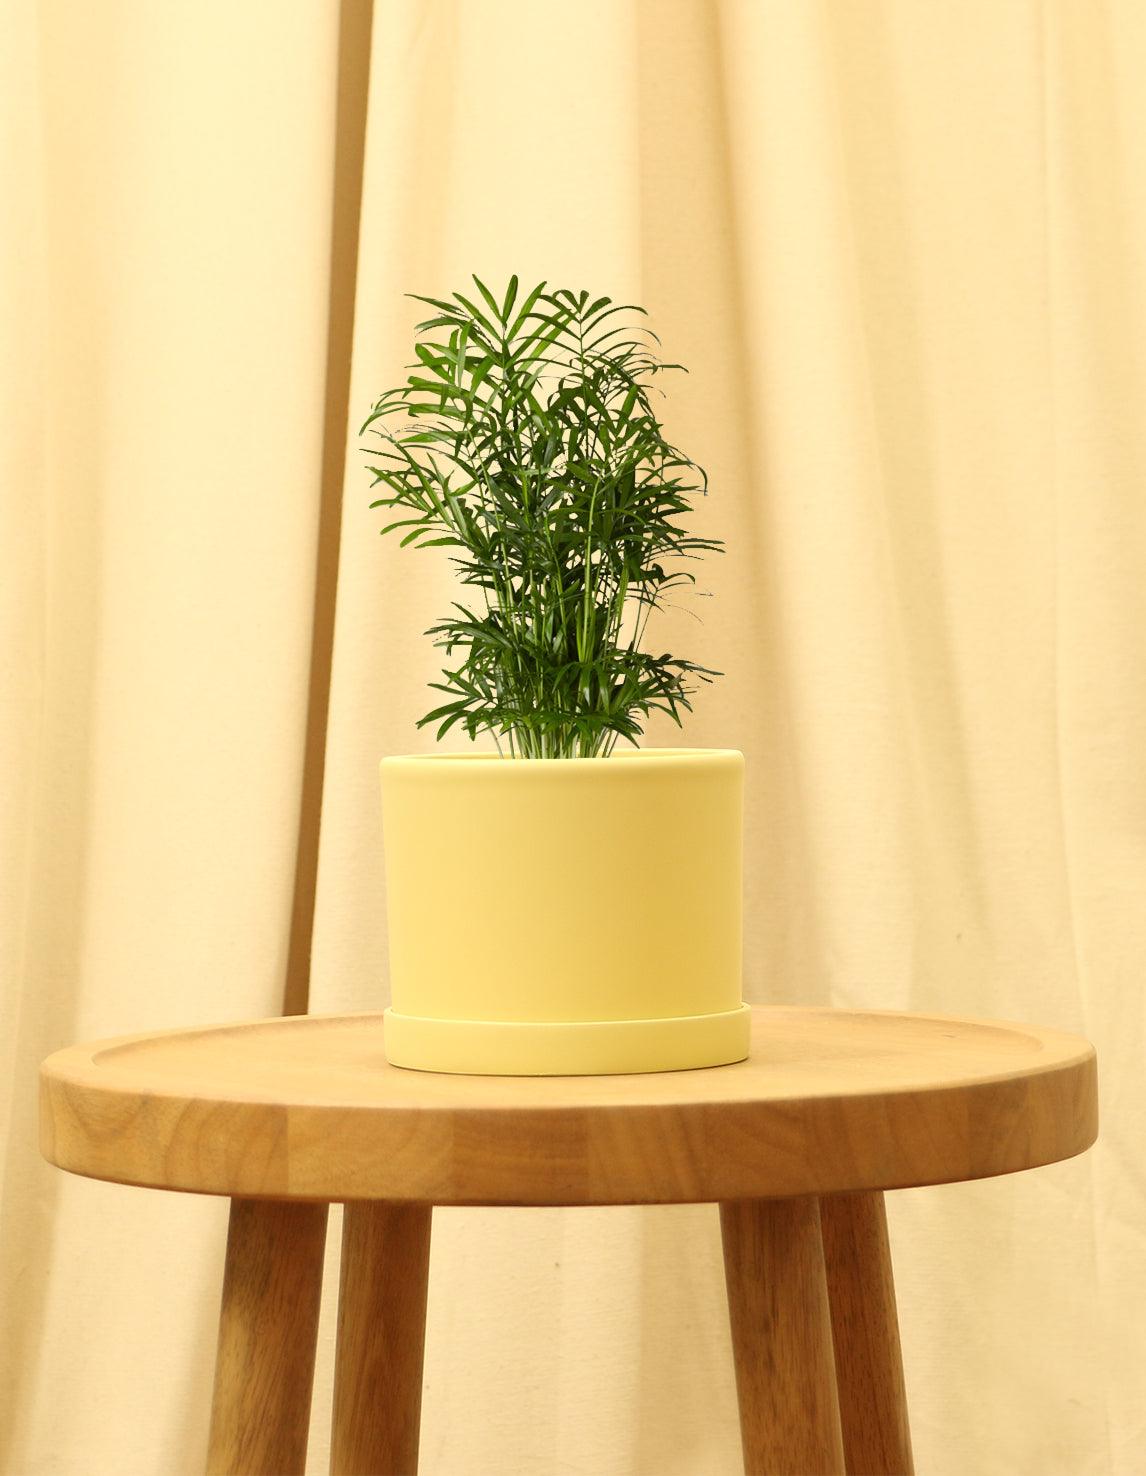 Small Parlor Palm in yellow pot.